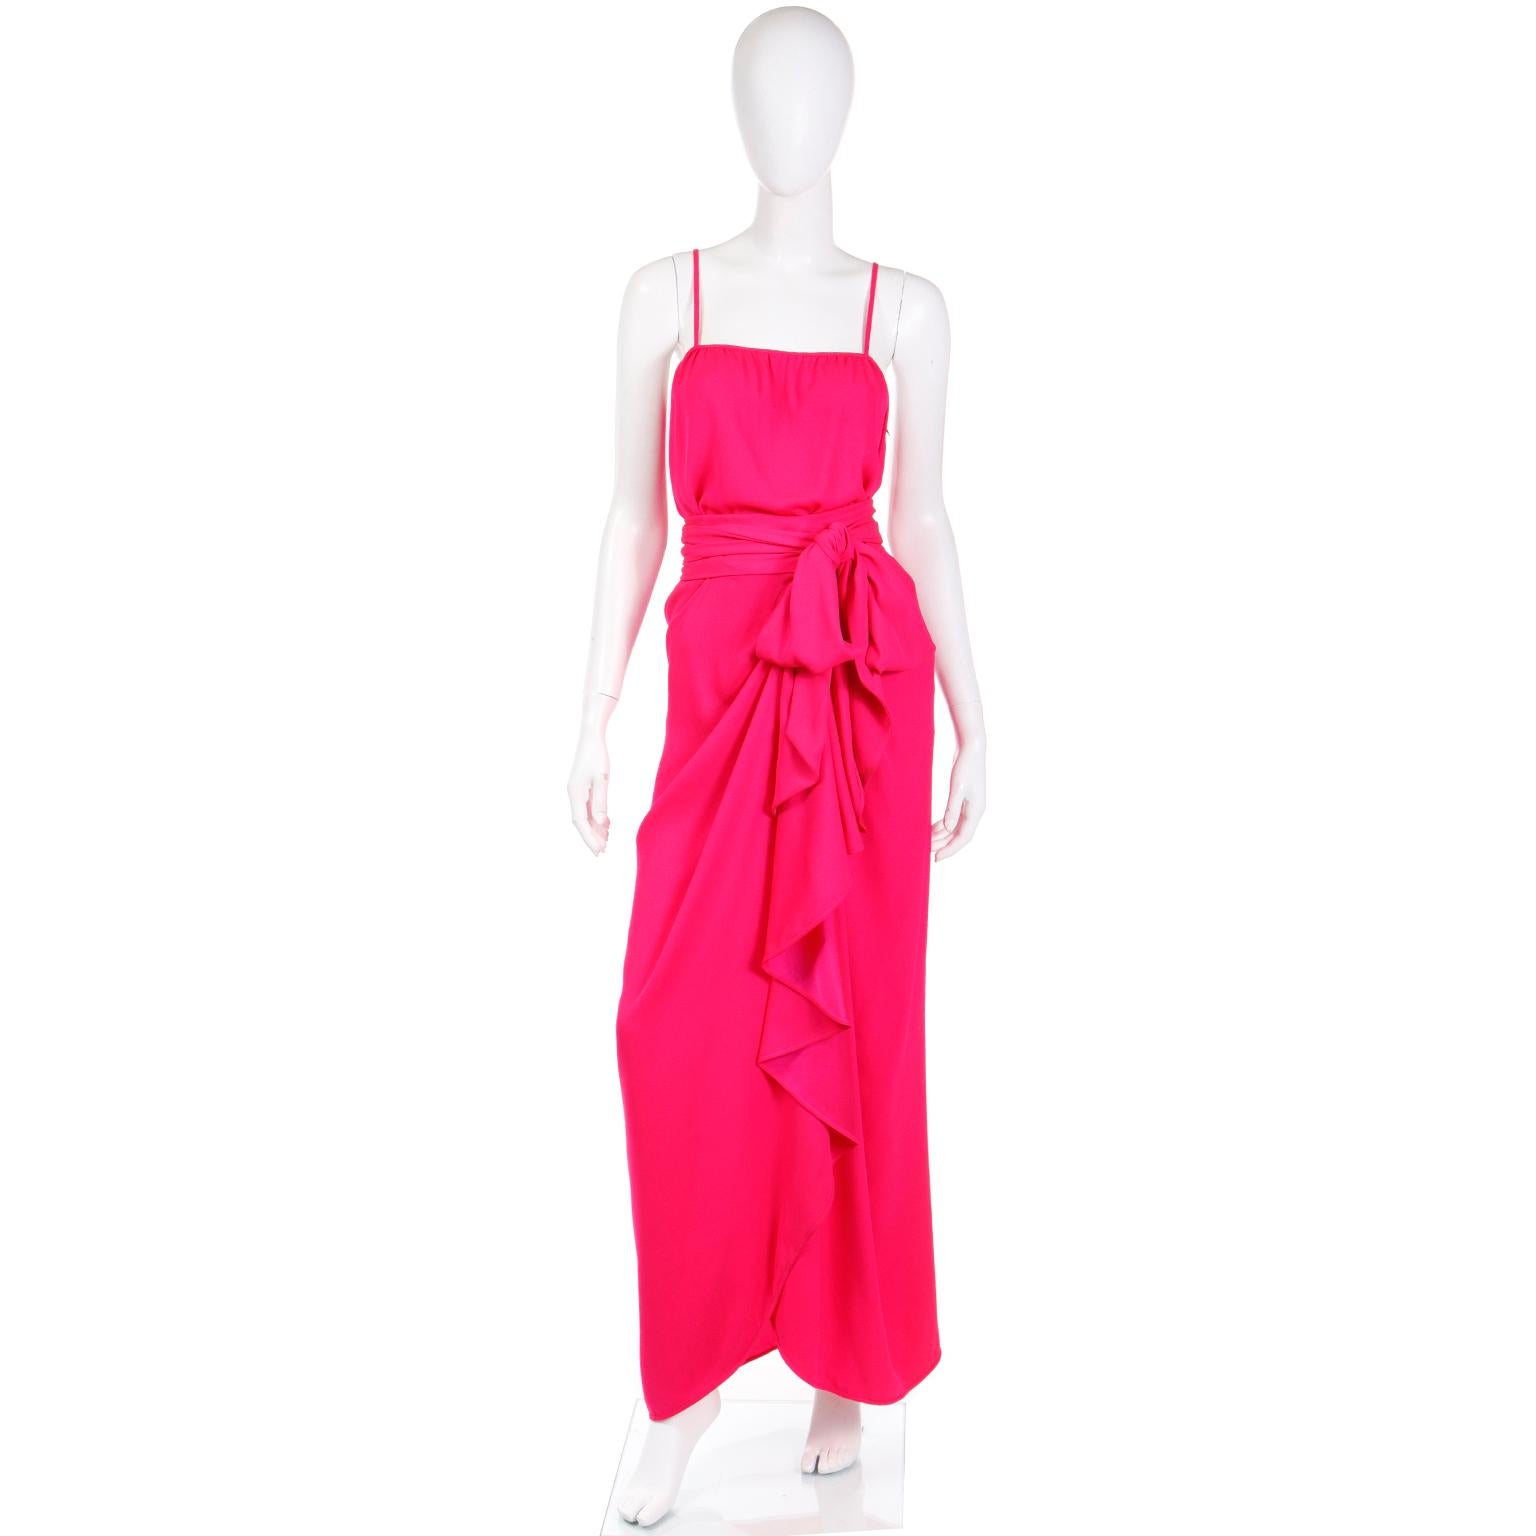 This is vintage Yves Saint Laurent Haute Couture bright pink 2 piece evening dress is so breathtaking in person! This one of a kind YSL ensemble includes a camisole and a long wrap ruffled skirt. Yves Saint Laurent created this style often,